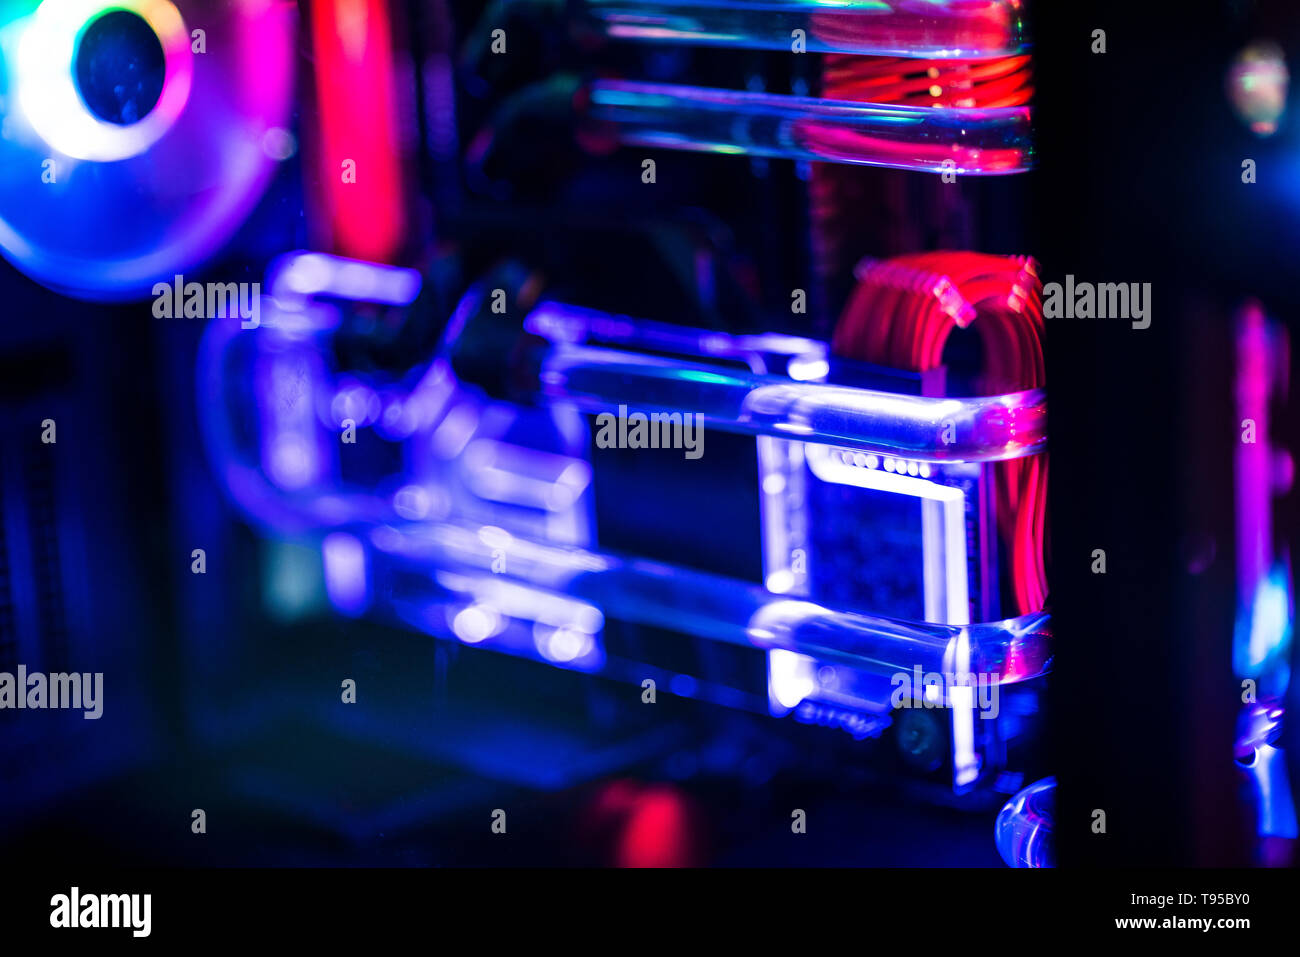 Inside a high performance computer. Computer circuit board and CPU cooling fans illuminated by internal LEDs inside a server class computer. Stock Photo